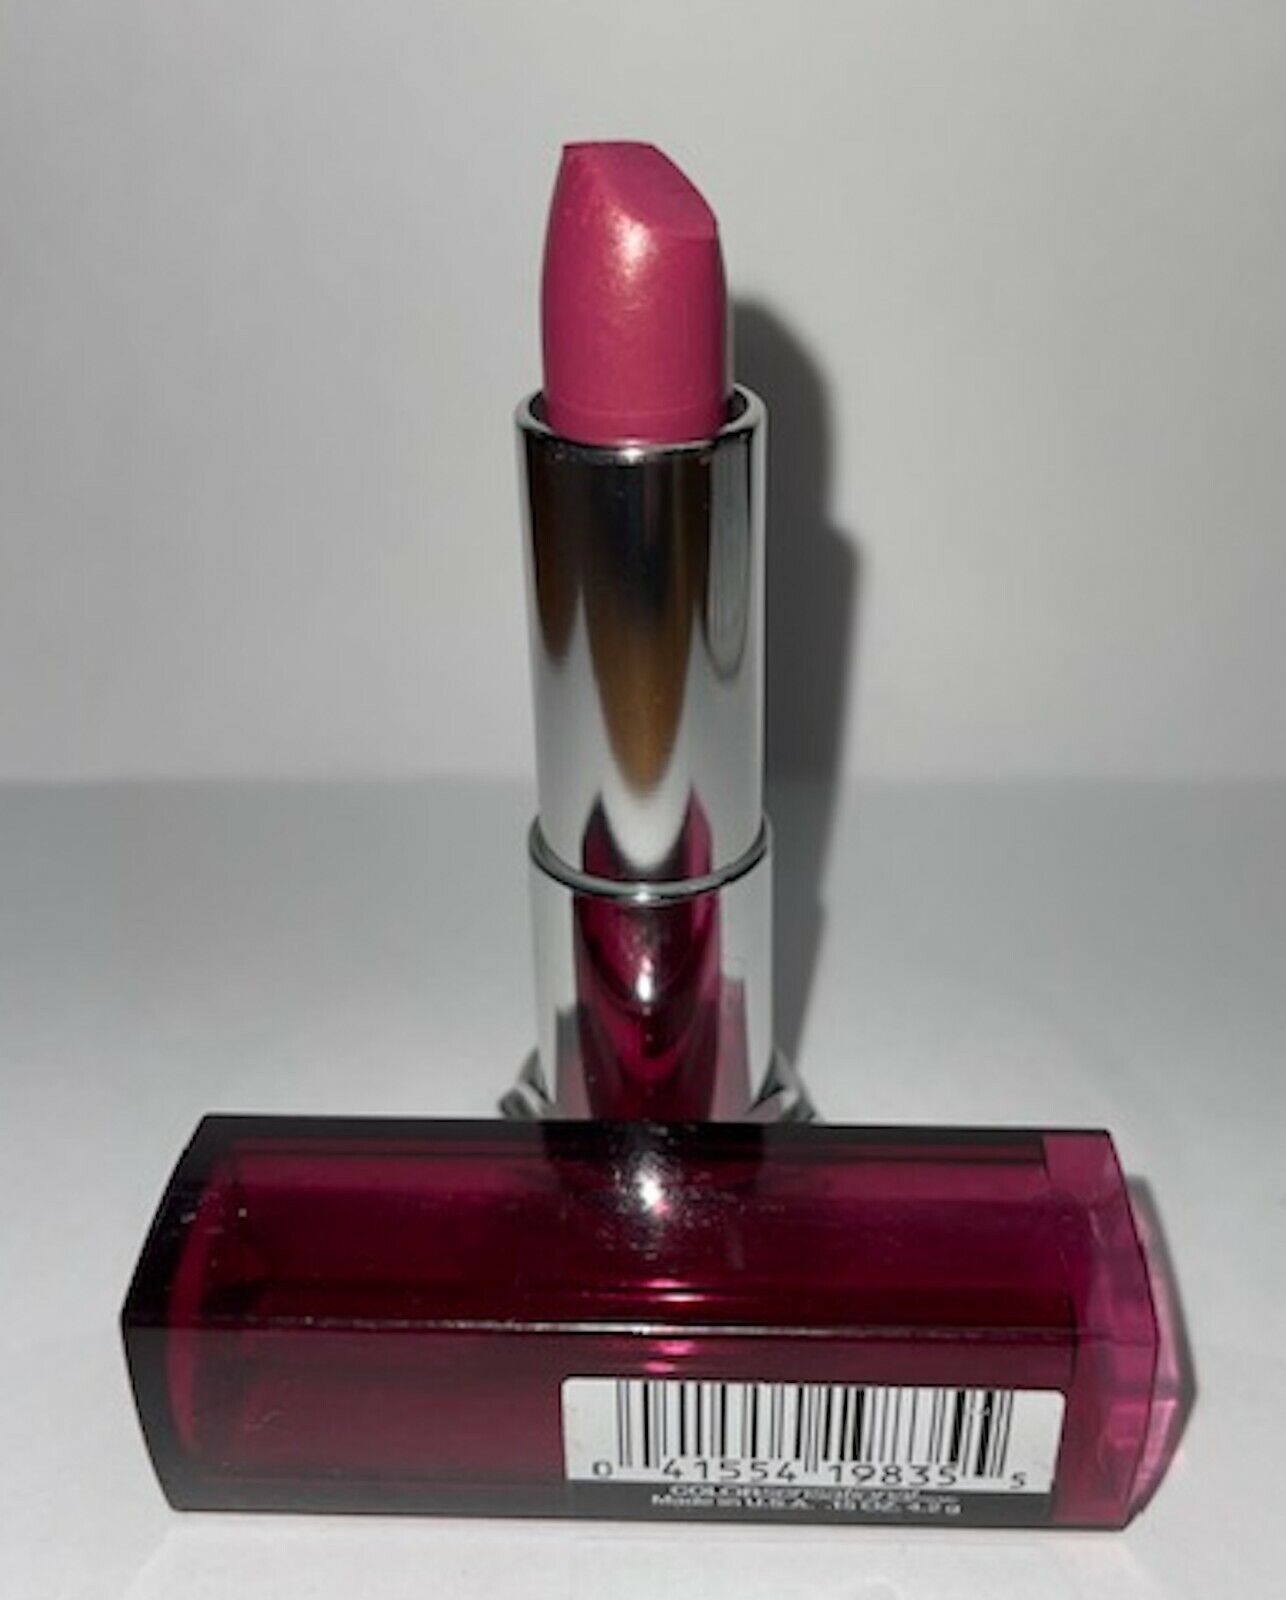 Maybelline COLORsensational lipstick 155 Party Pink *DAMAGED TIPS*